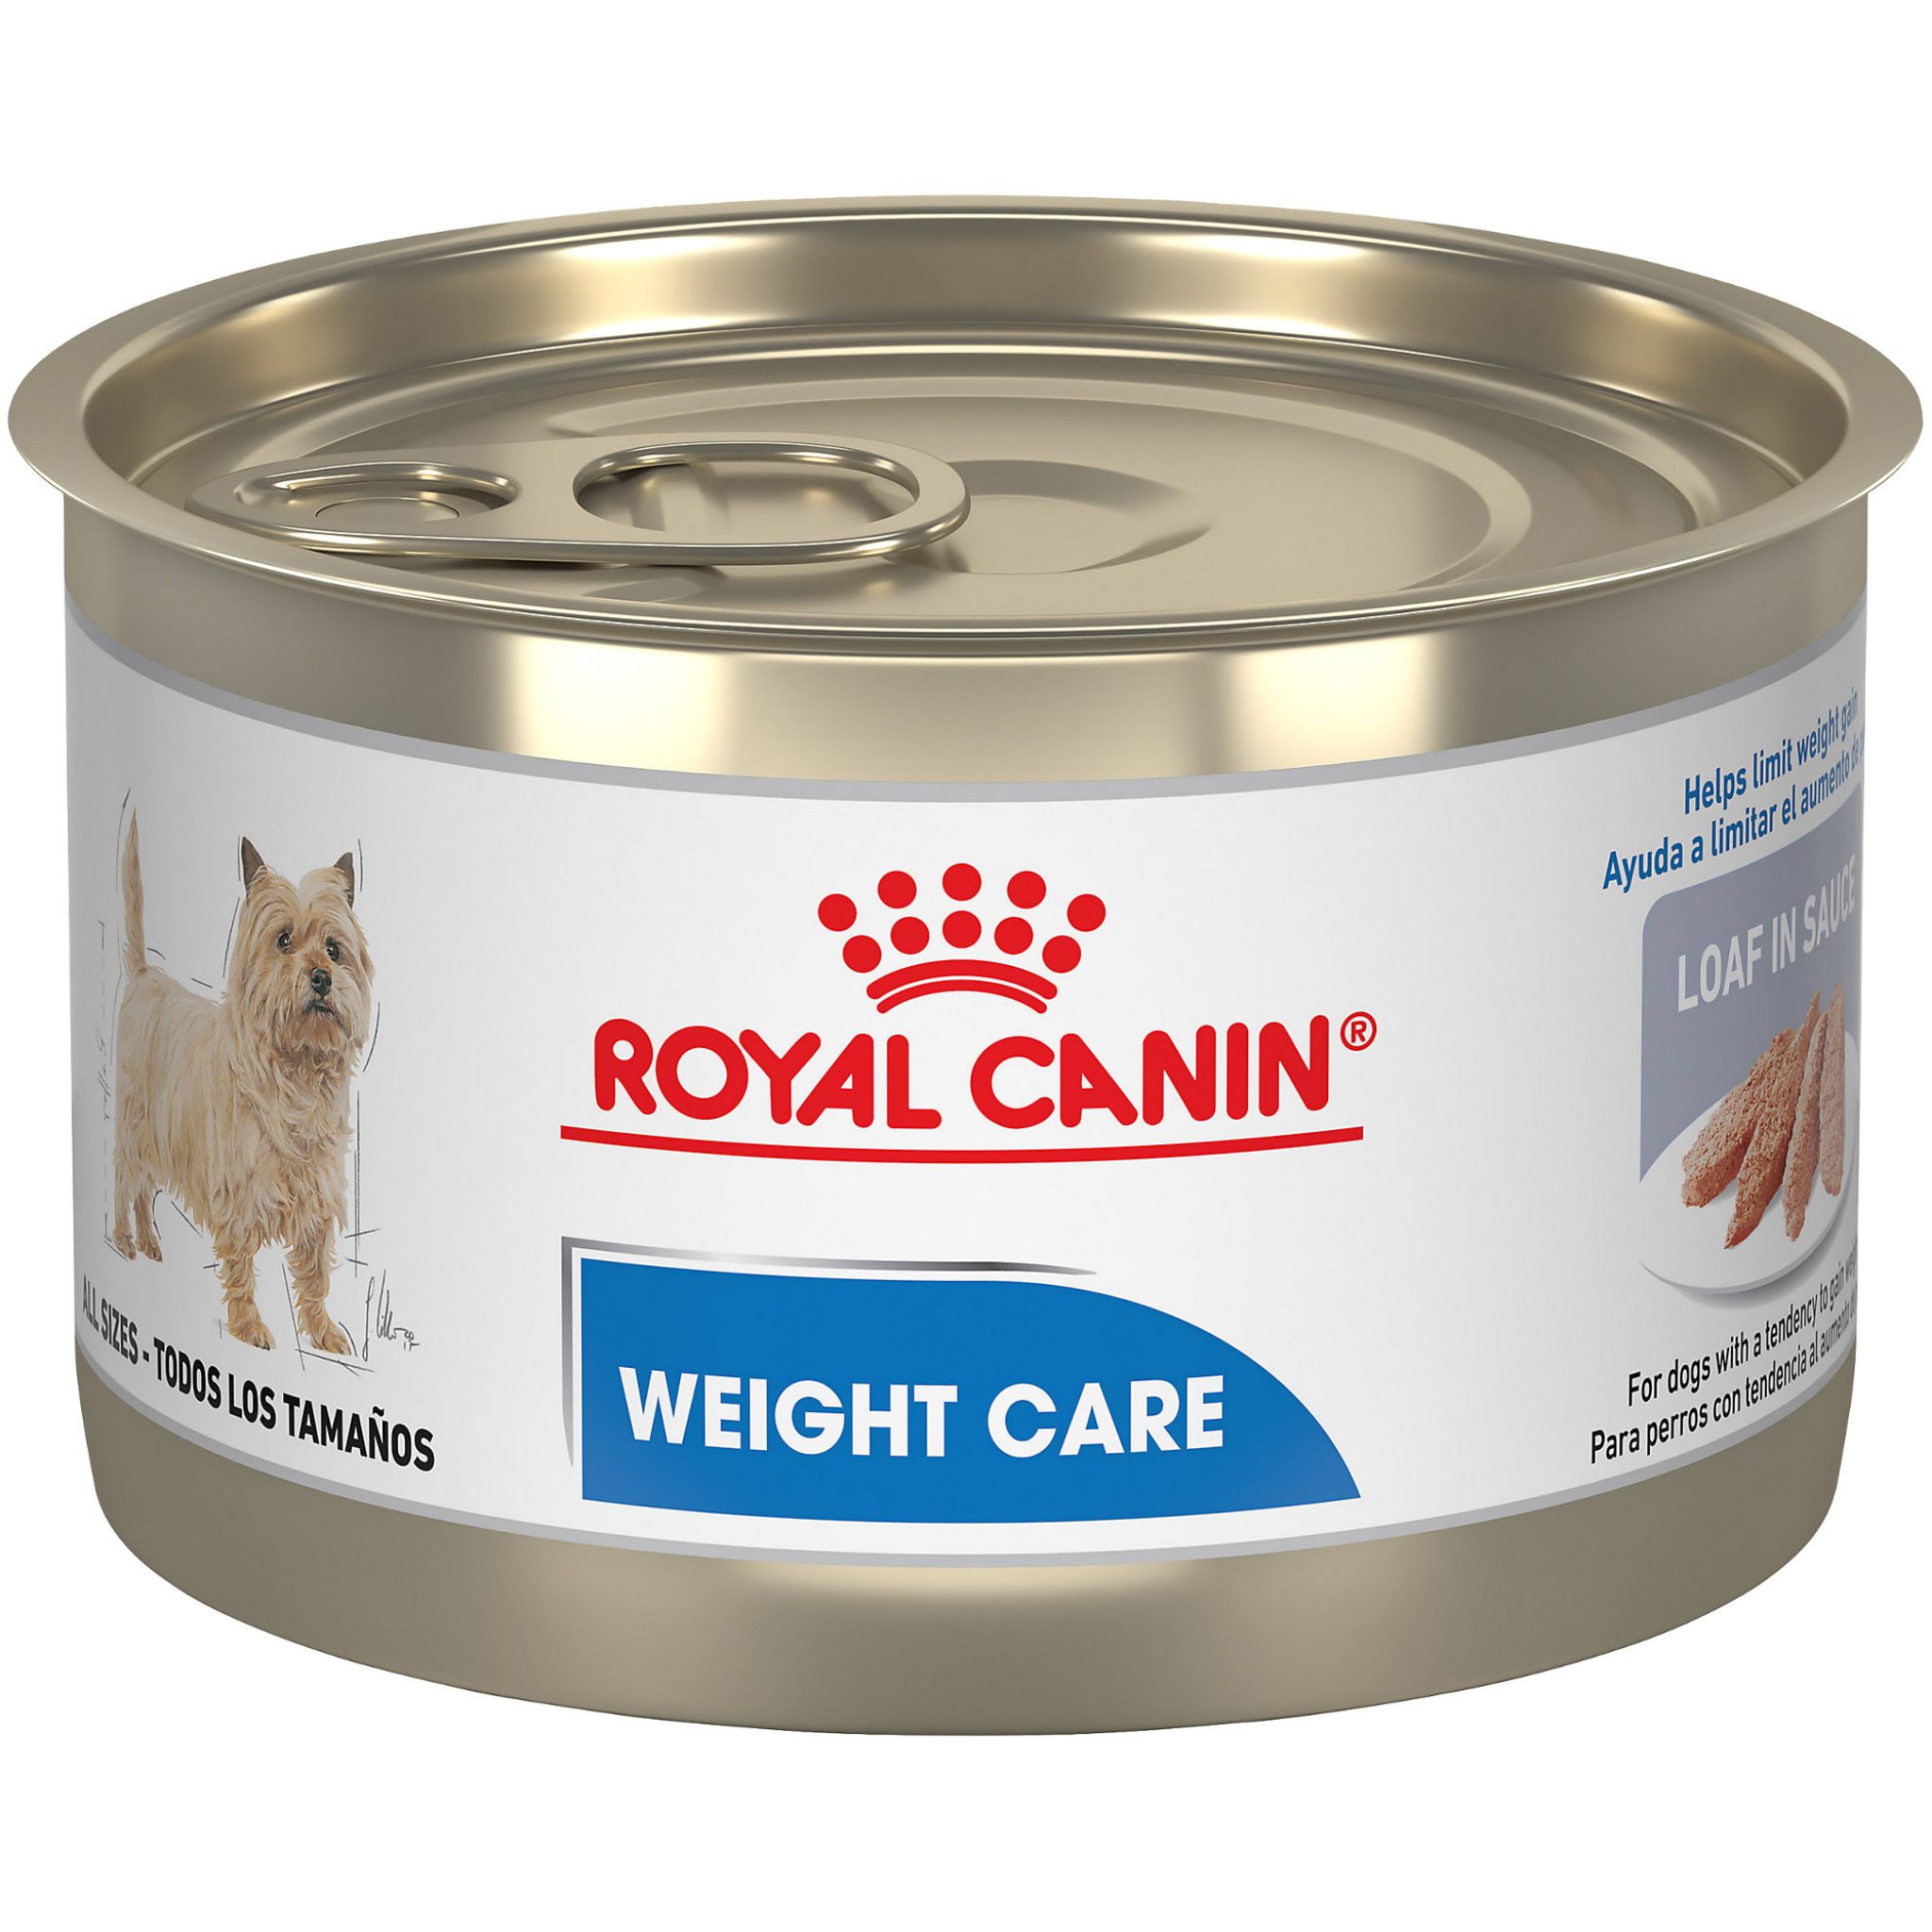 Royal Canin Weight Care Loaf in Sauce Wet Dog Food, 5.2 oz., Case of 24